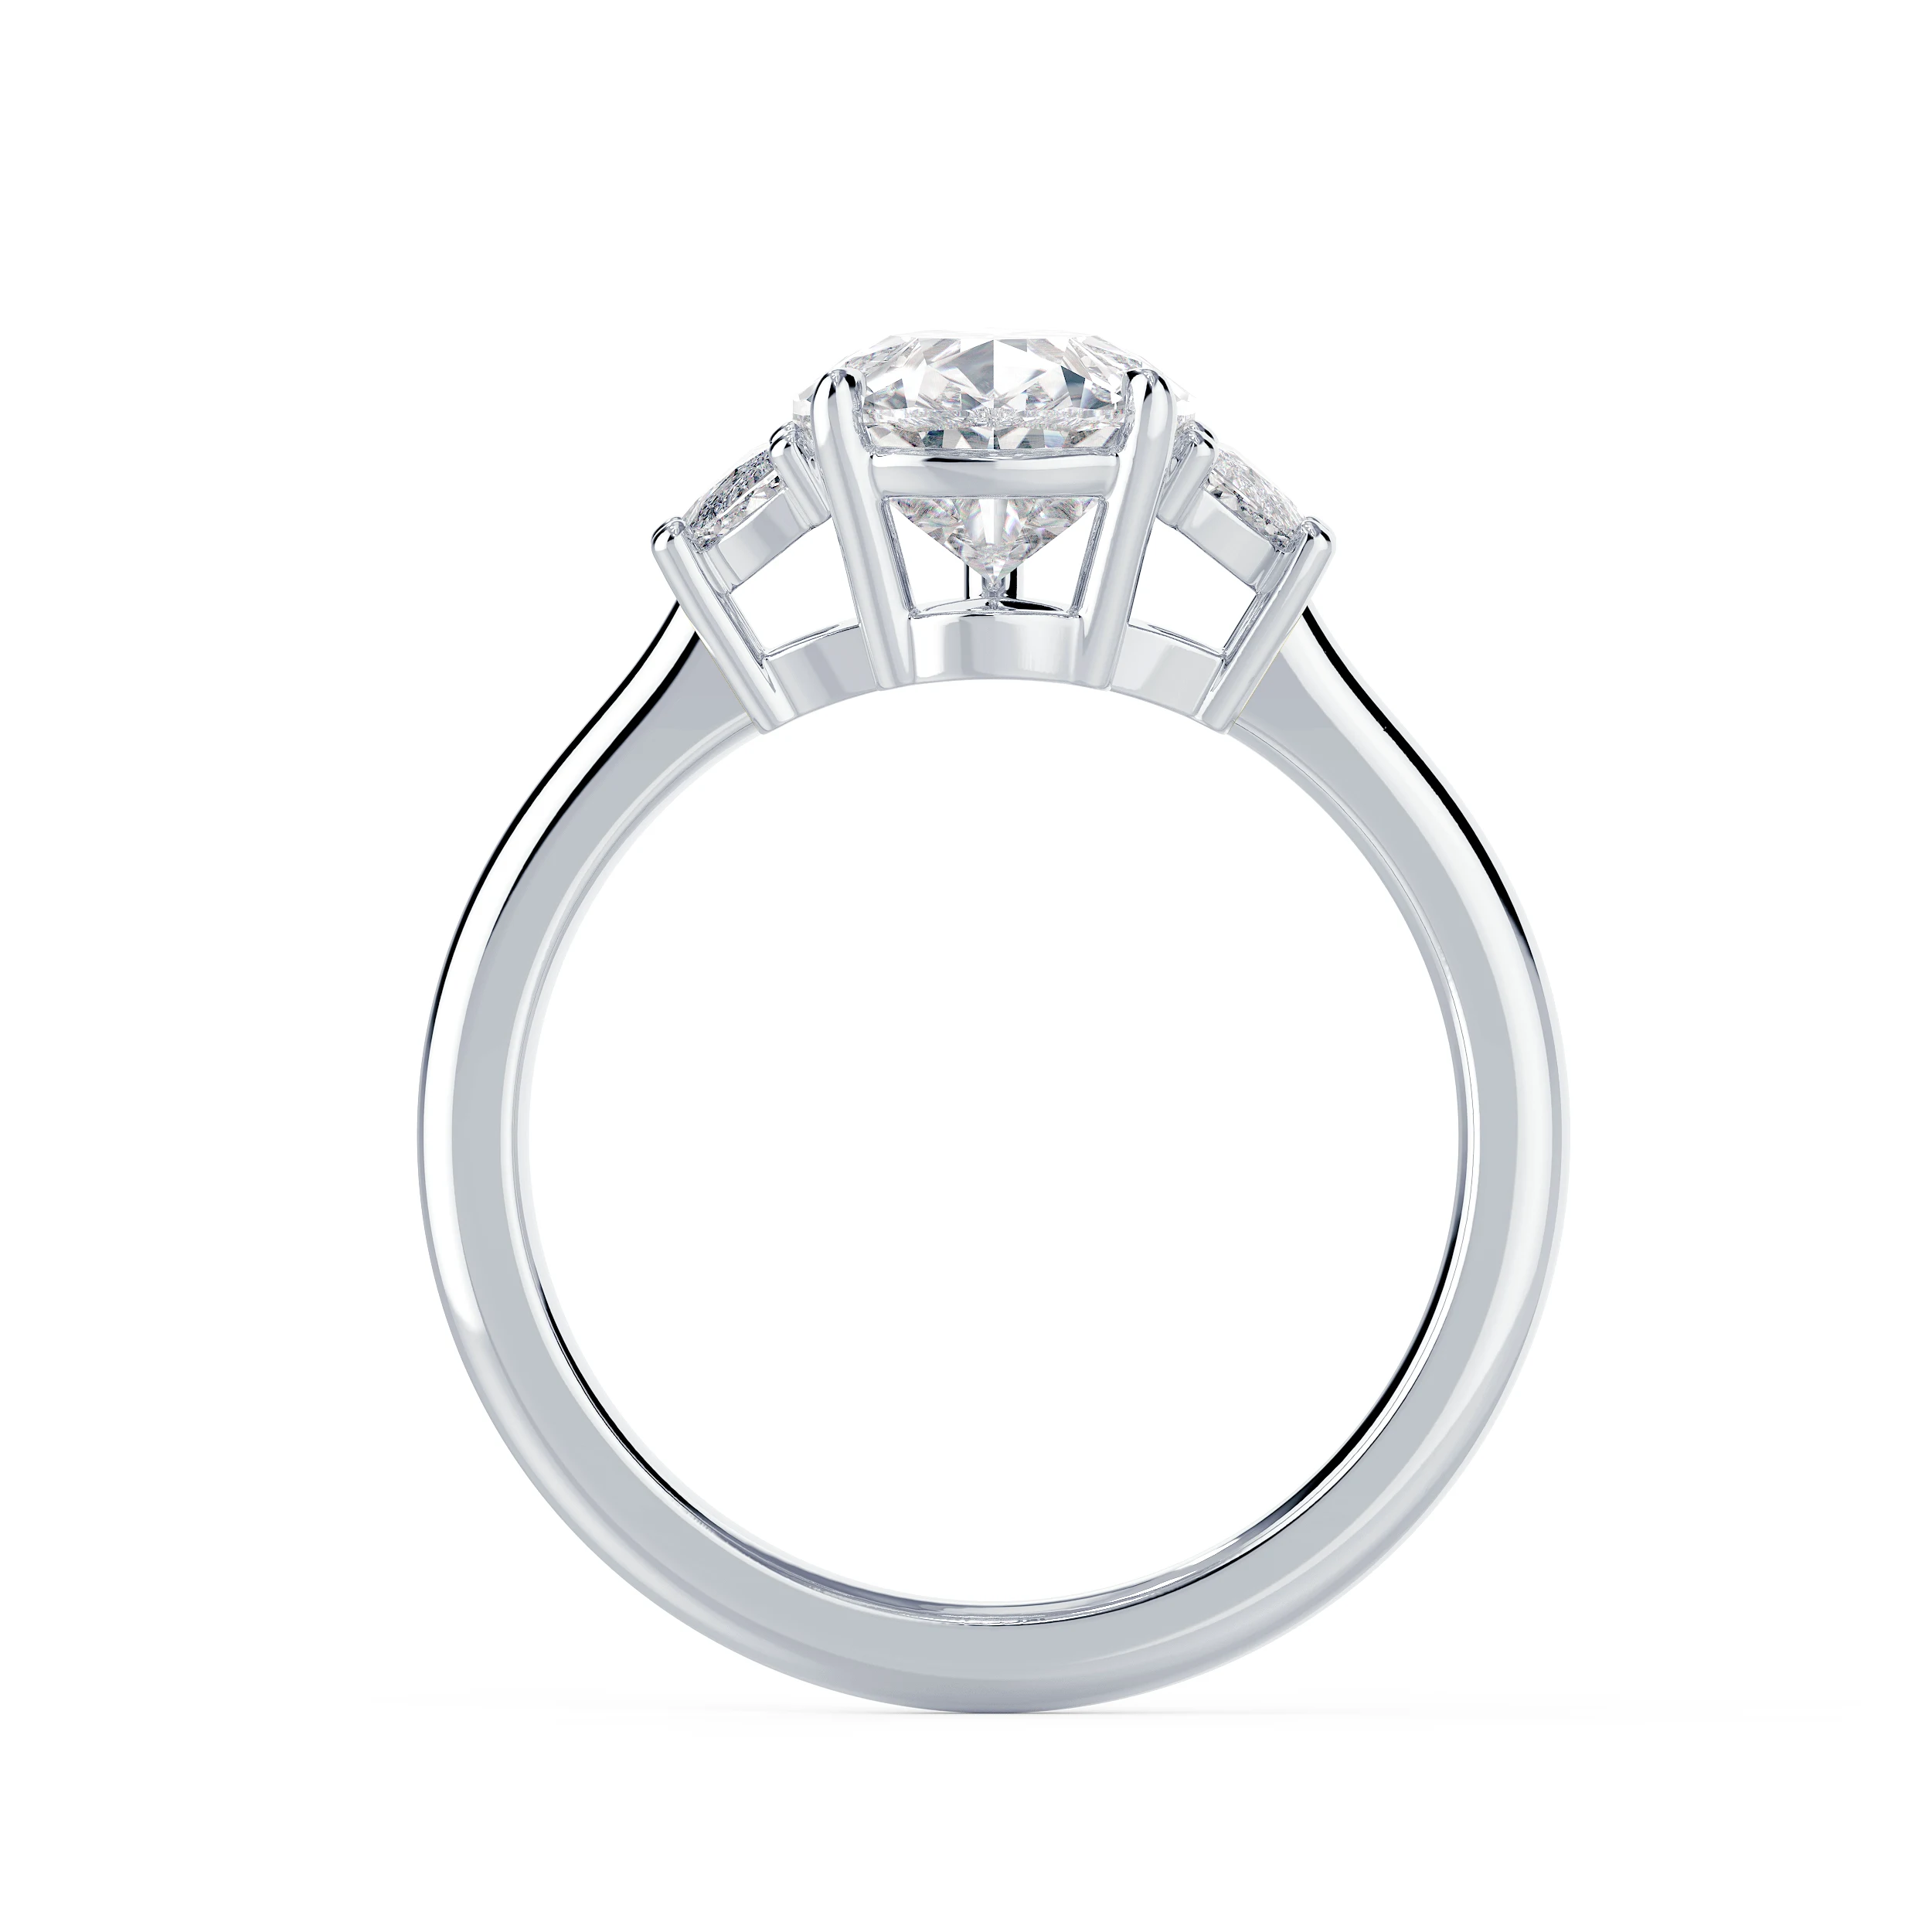 White Gold Pear and Half Moon Setting featuring Exceptional Quality Diamonds (Profile View)